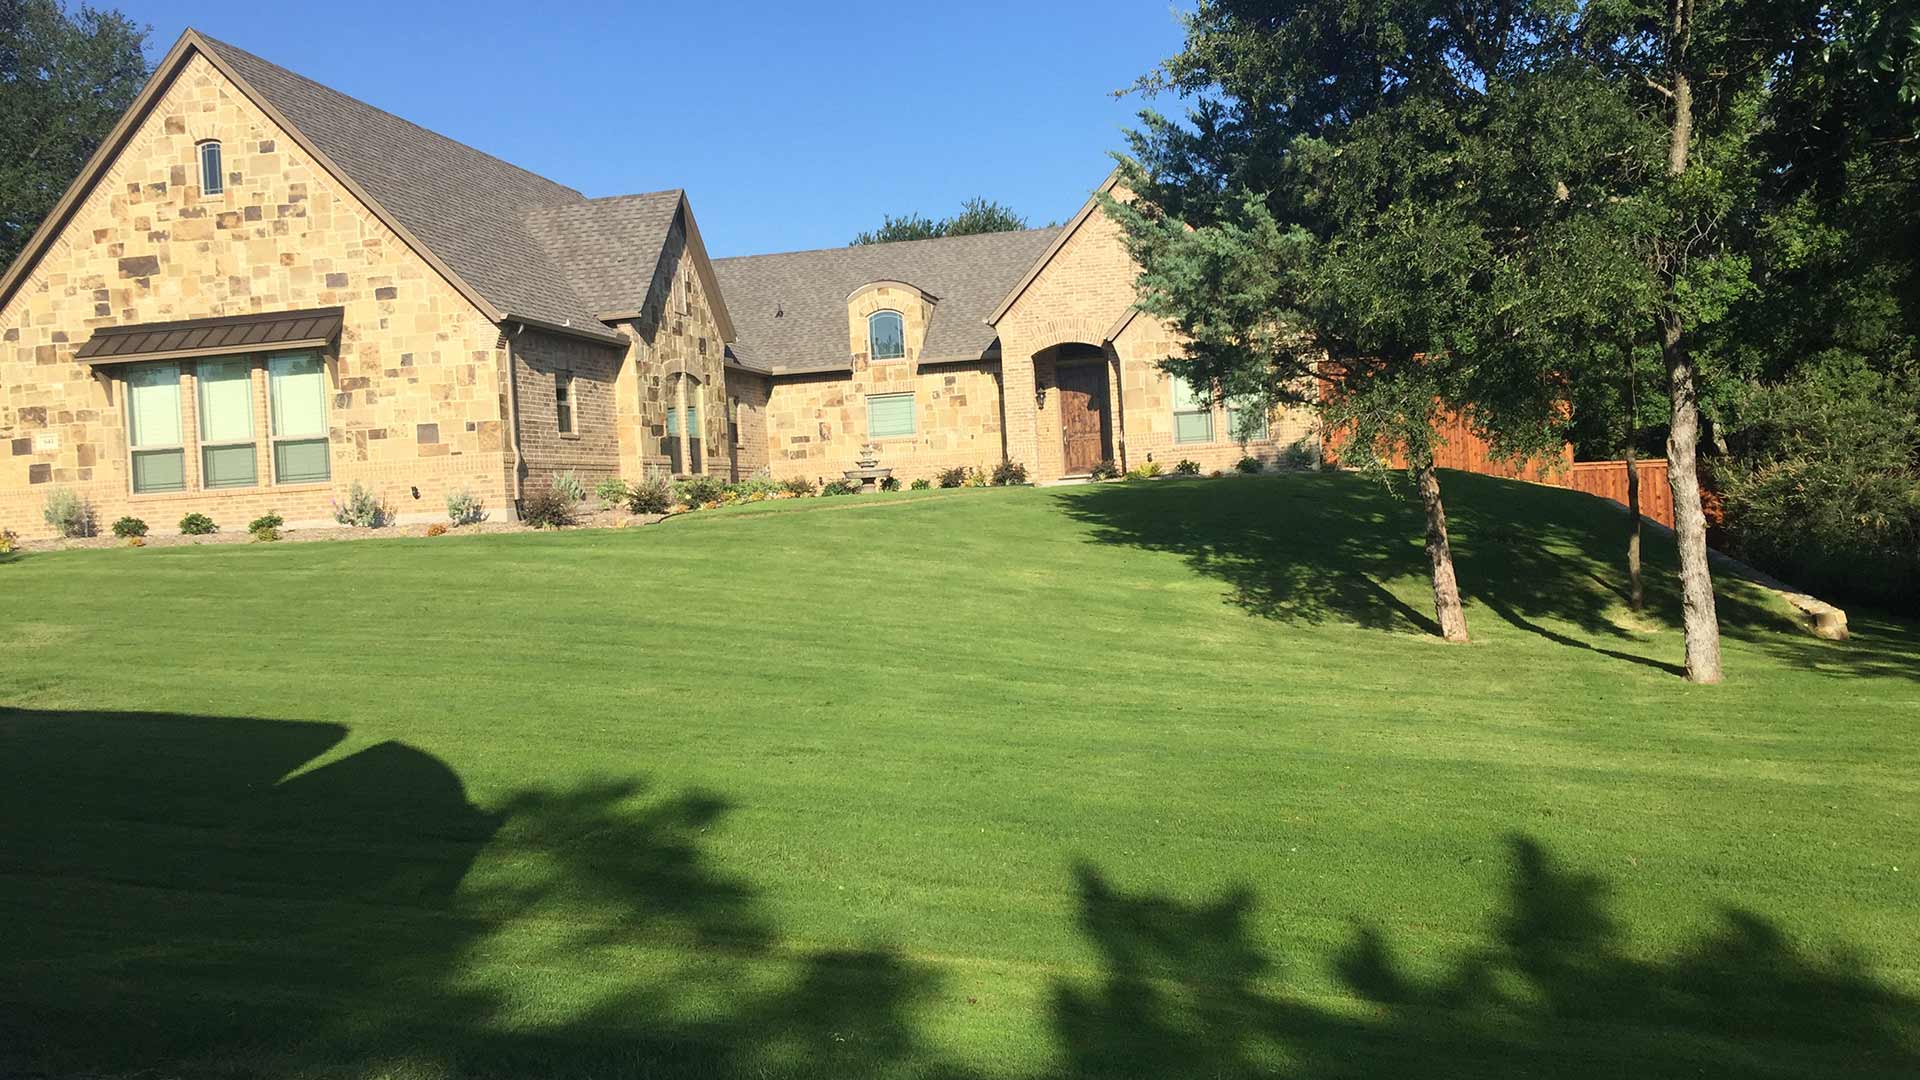 Home in Keller, TX with a healthy, green lawn.